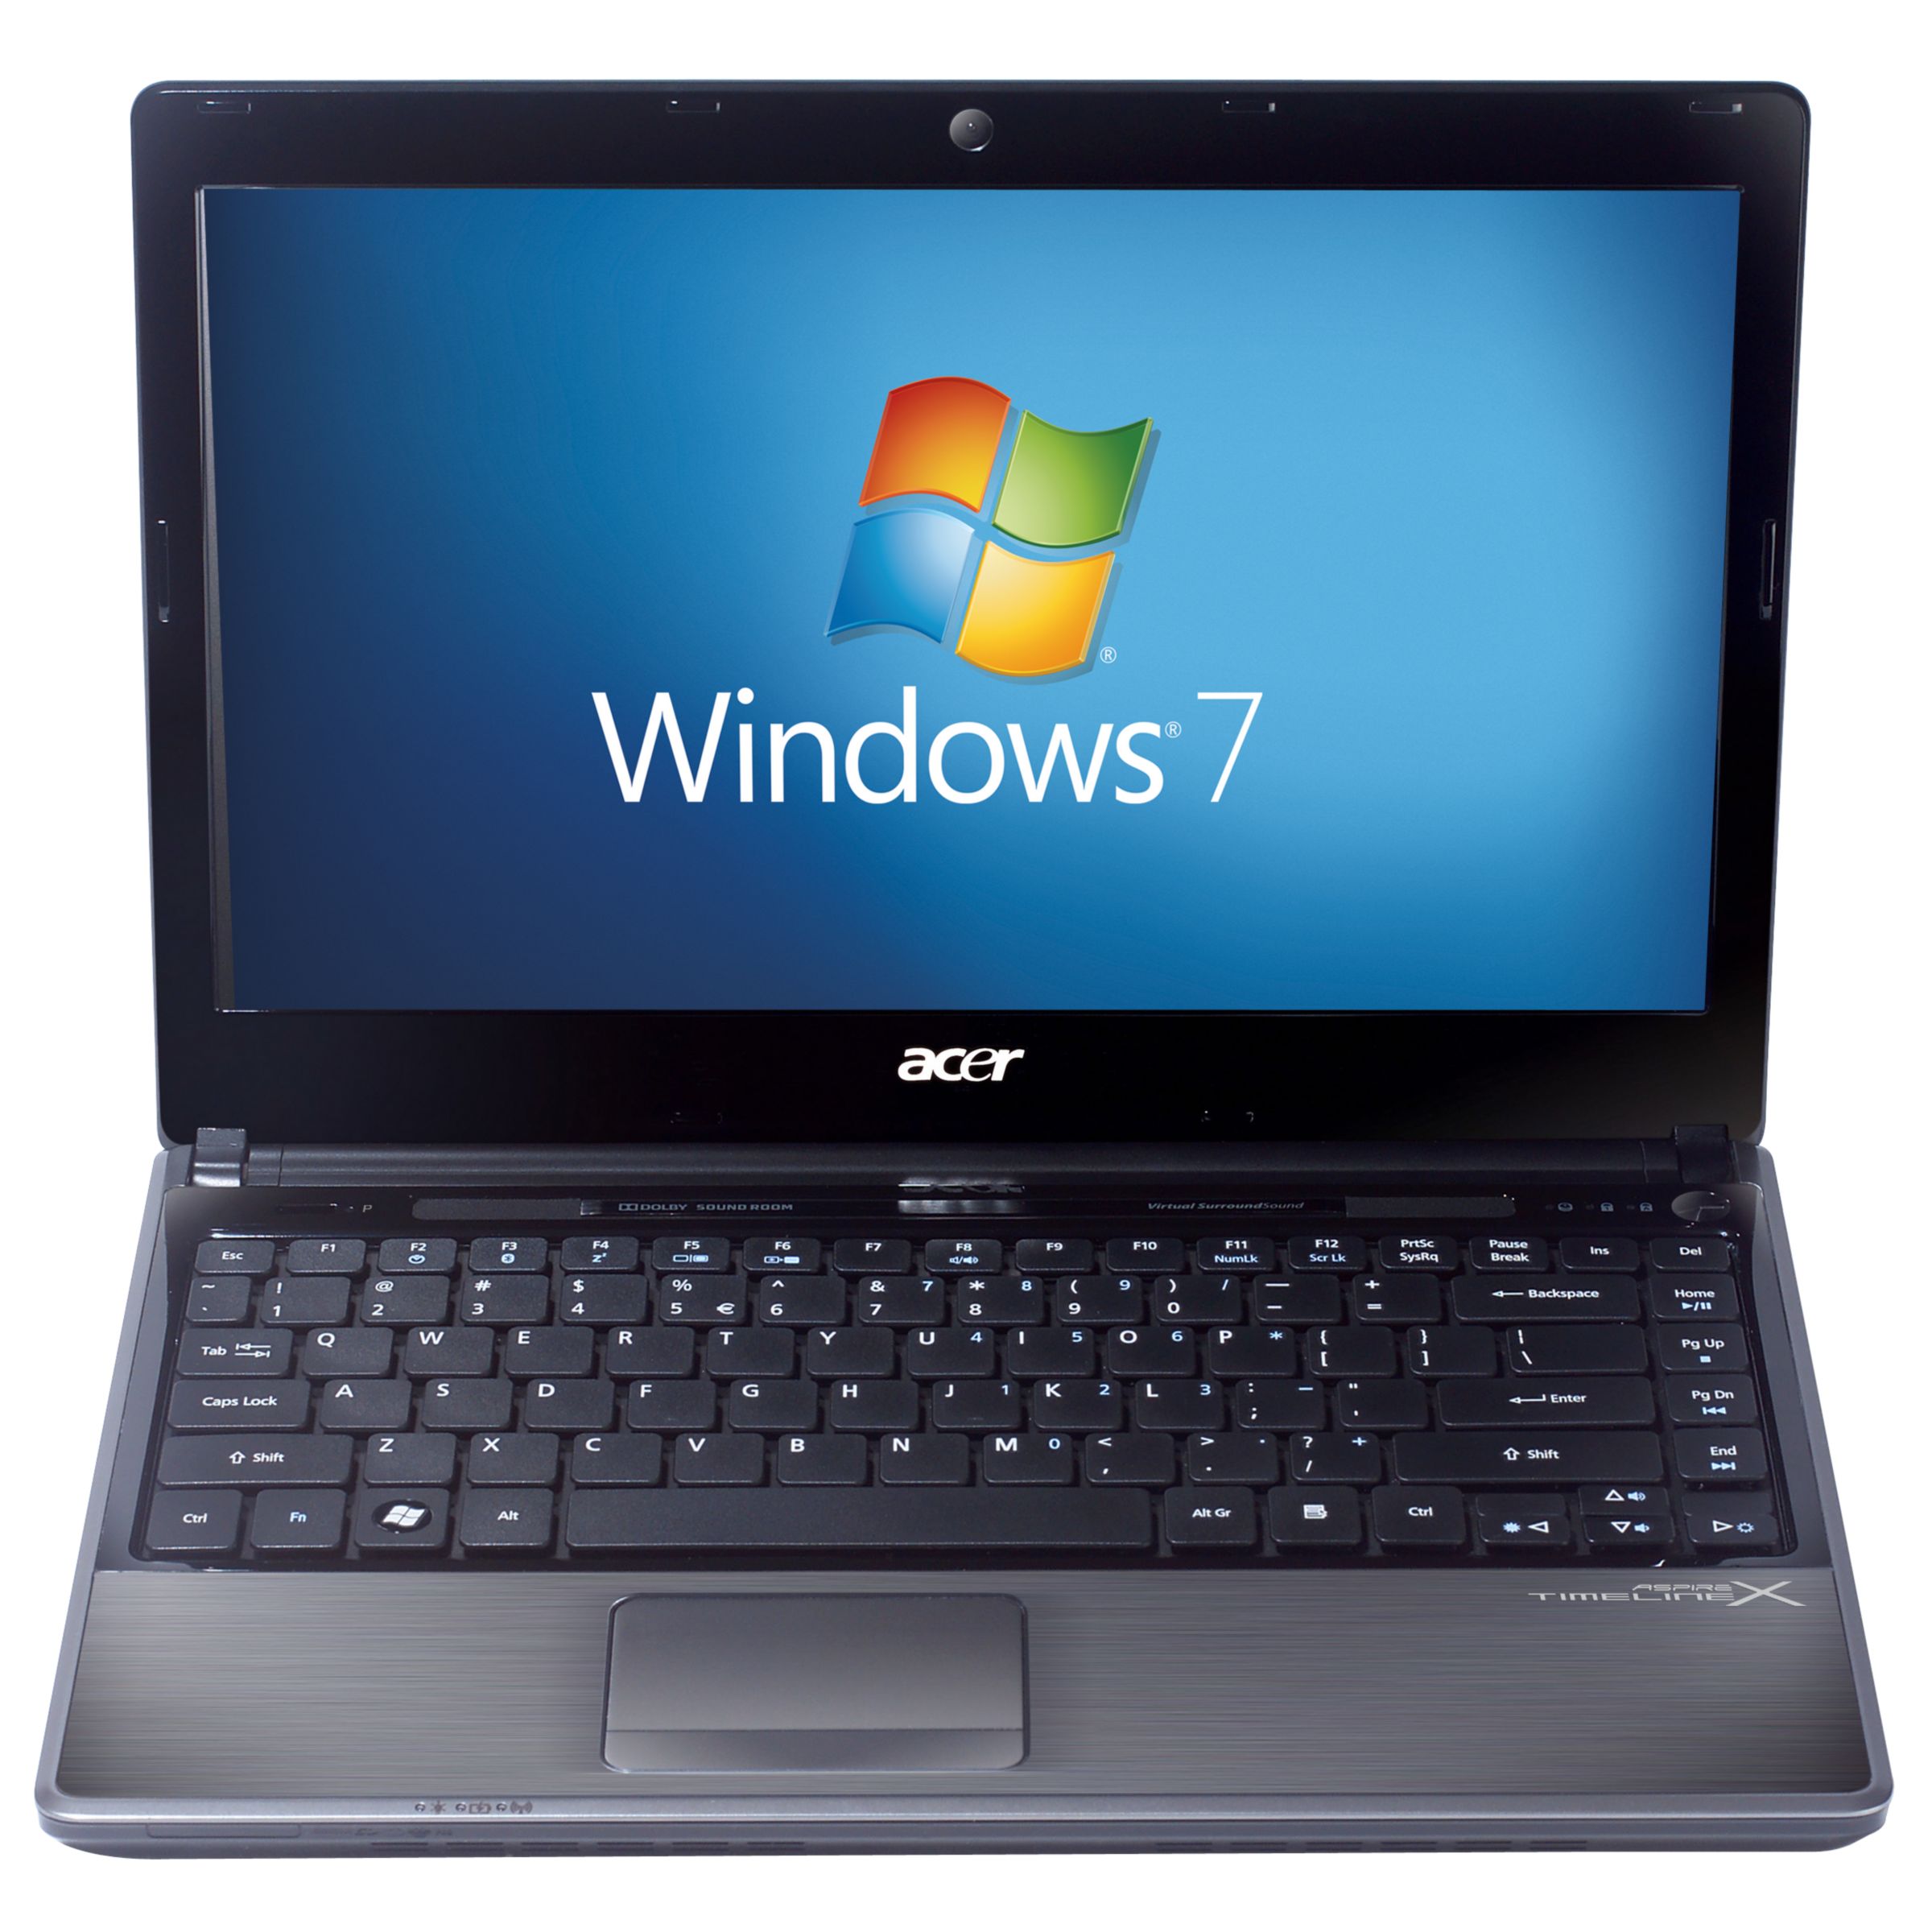 Acer Aspire AS3820TZ Laptop, Intel Pentium Core, 320GB, 2.0GHz, 3GB RAM with 13.3 Inch Display at John Lewis